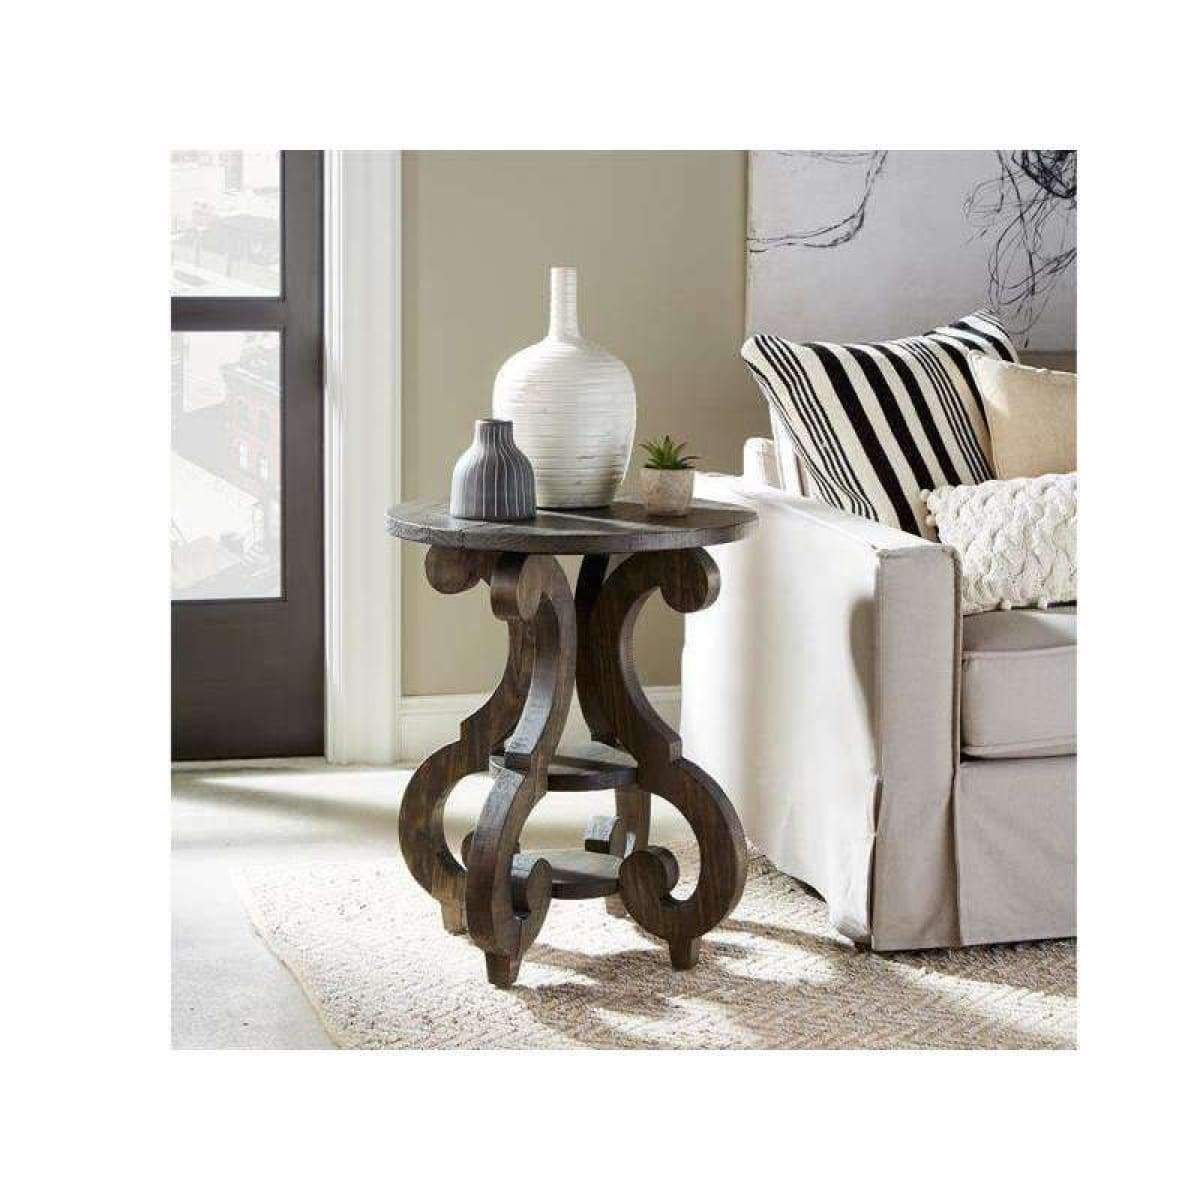 Bellamy Round Accent End Table - END TABLE/SIDE TABLE